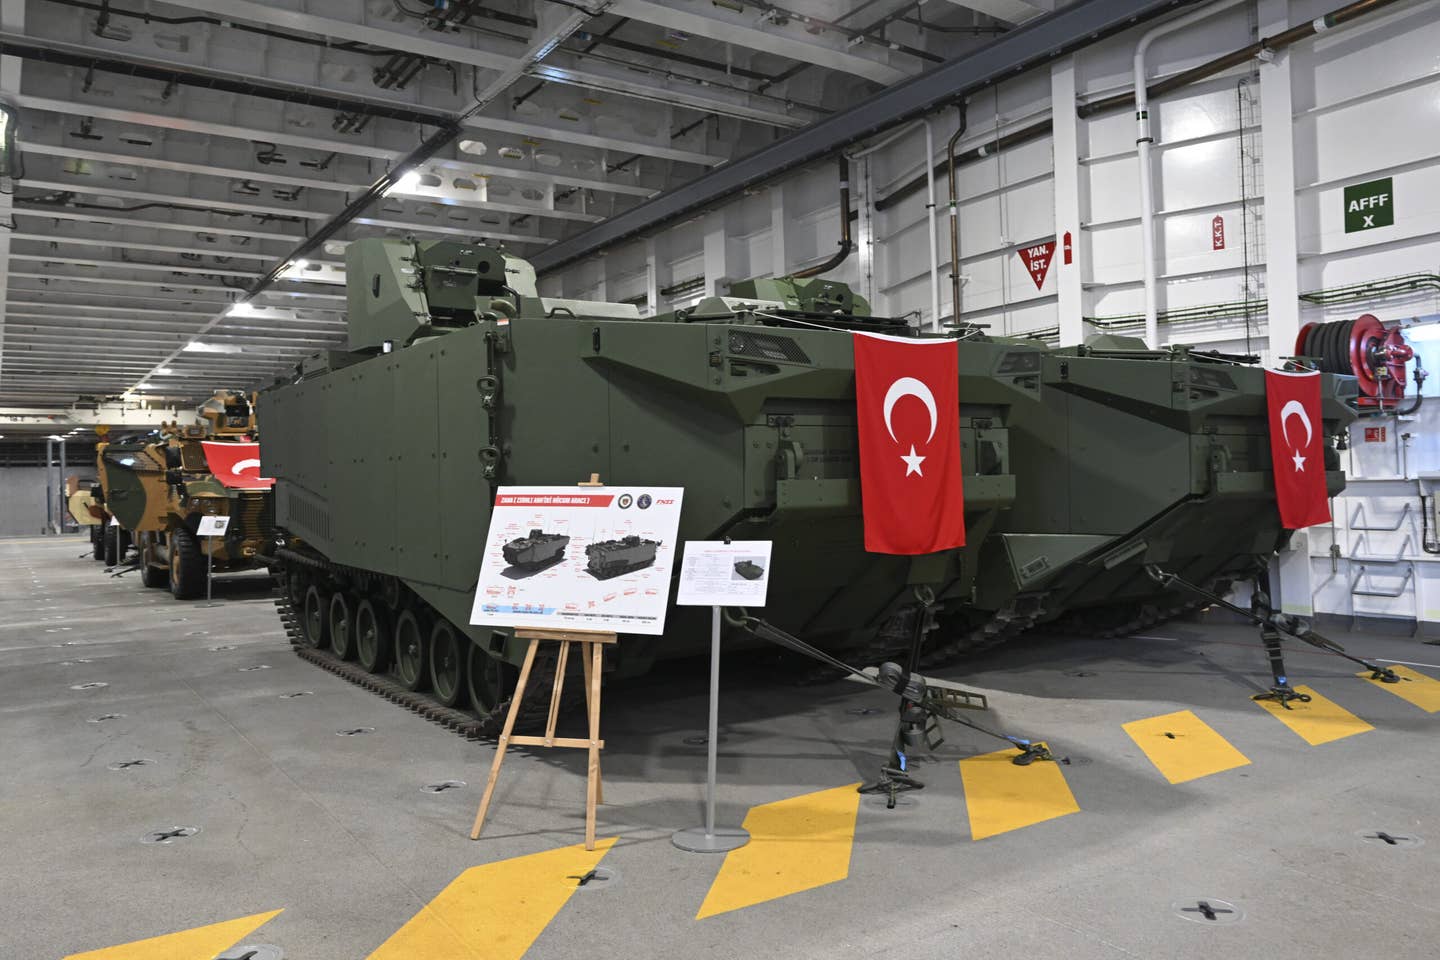 Armored Amphibious Assault Vehicles are seen in the hangar of TCG <em>Anadolu</em> after the ceremony. <em>Credit: Photo by Serhat Cagdas/Anadolu Agency via Getty Images</em>